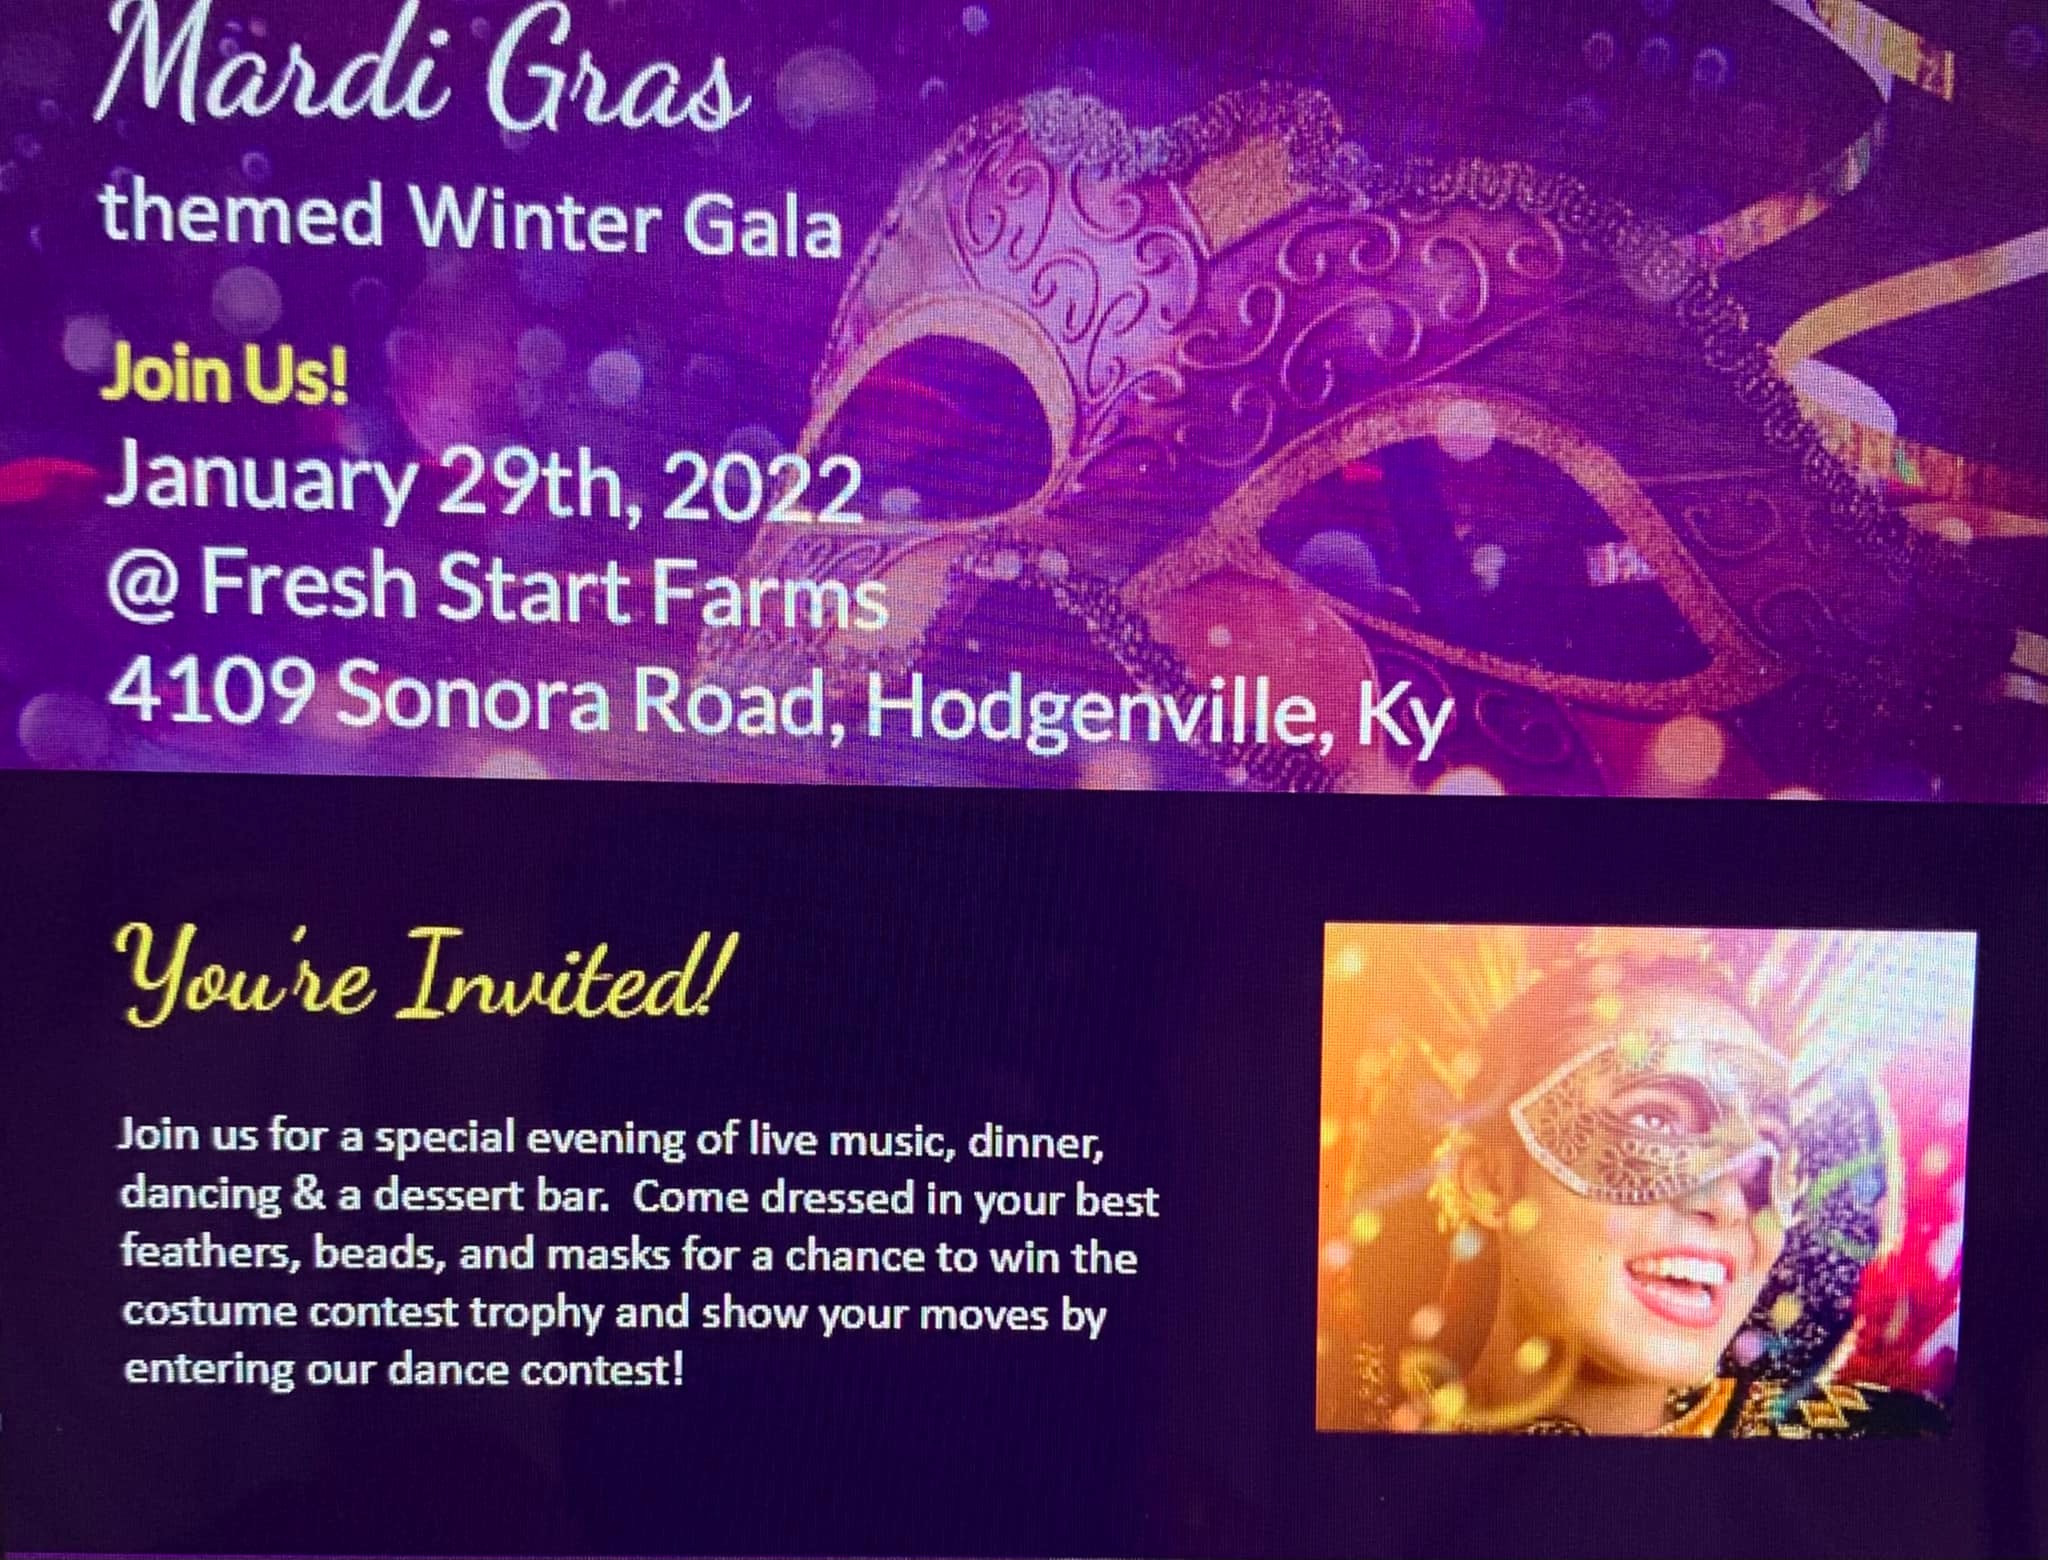 Mardi Gras themed Winter Gala sells out in just 30 hours! LaRue